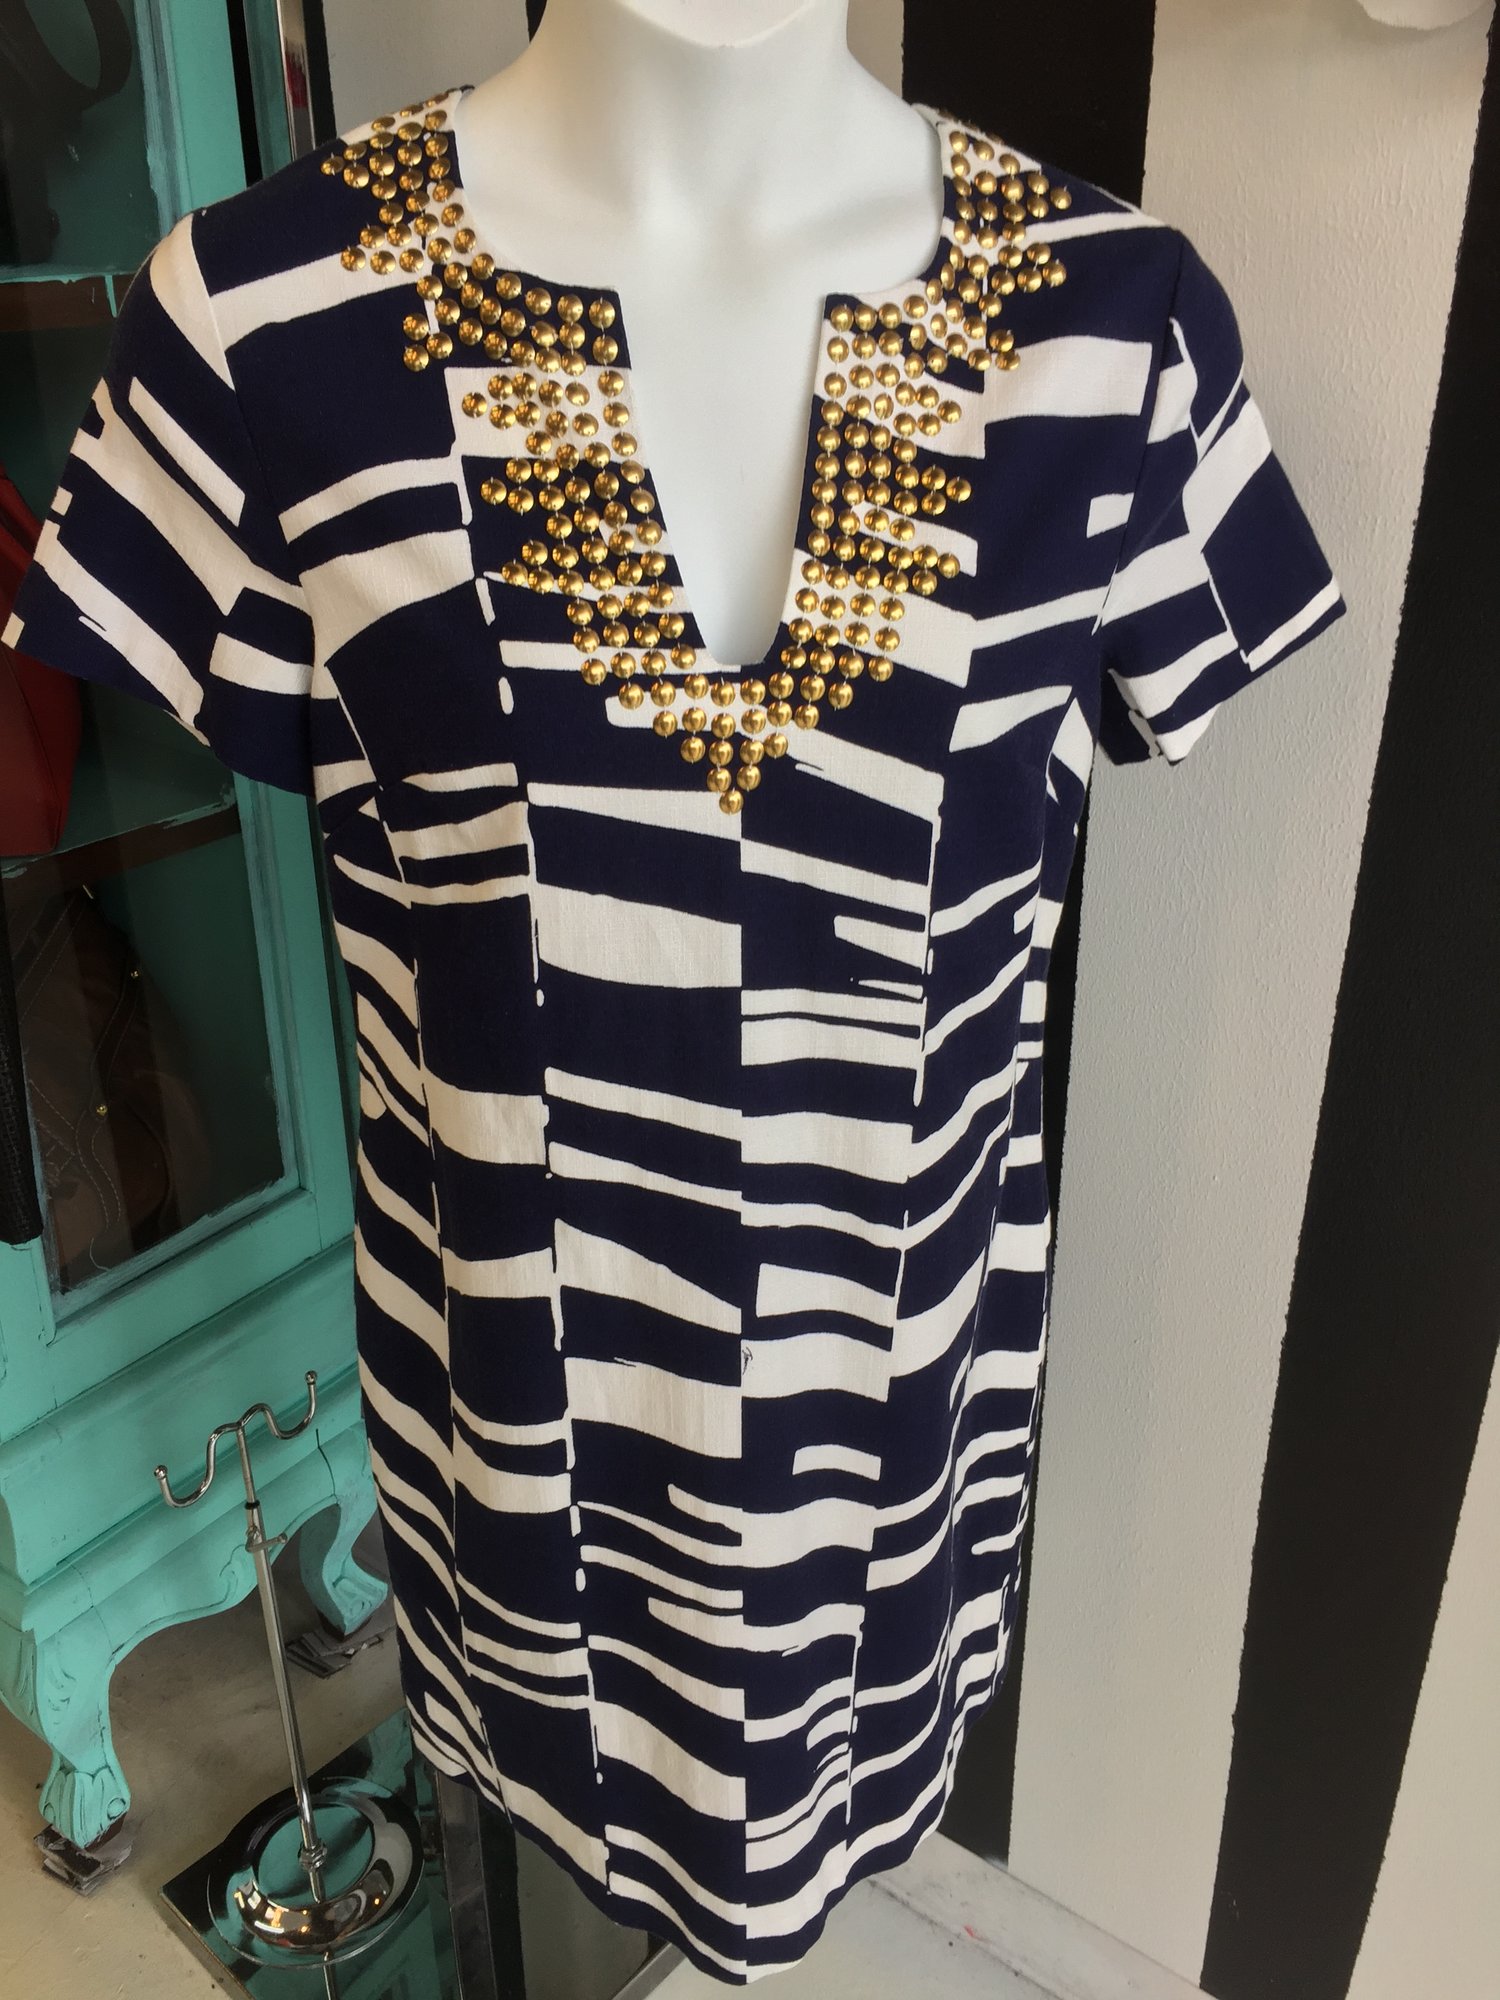 Chic Trina Turk dress. Brand new, size 10. Navy with white stripes and gold detail. With retail tags. Retail price: $398